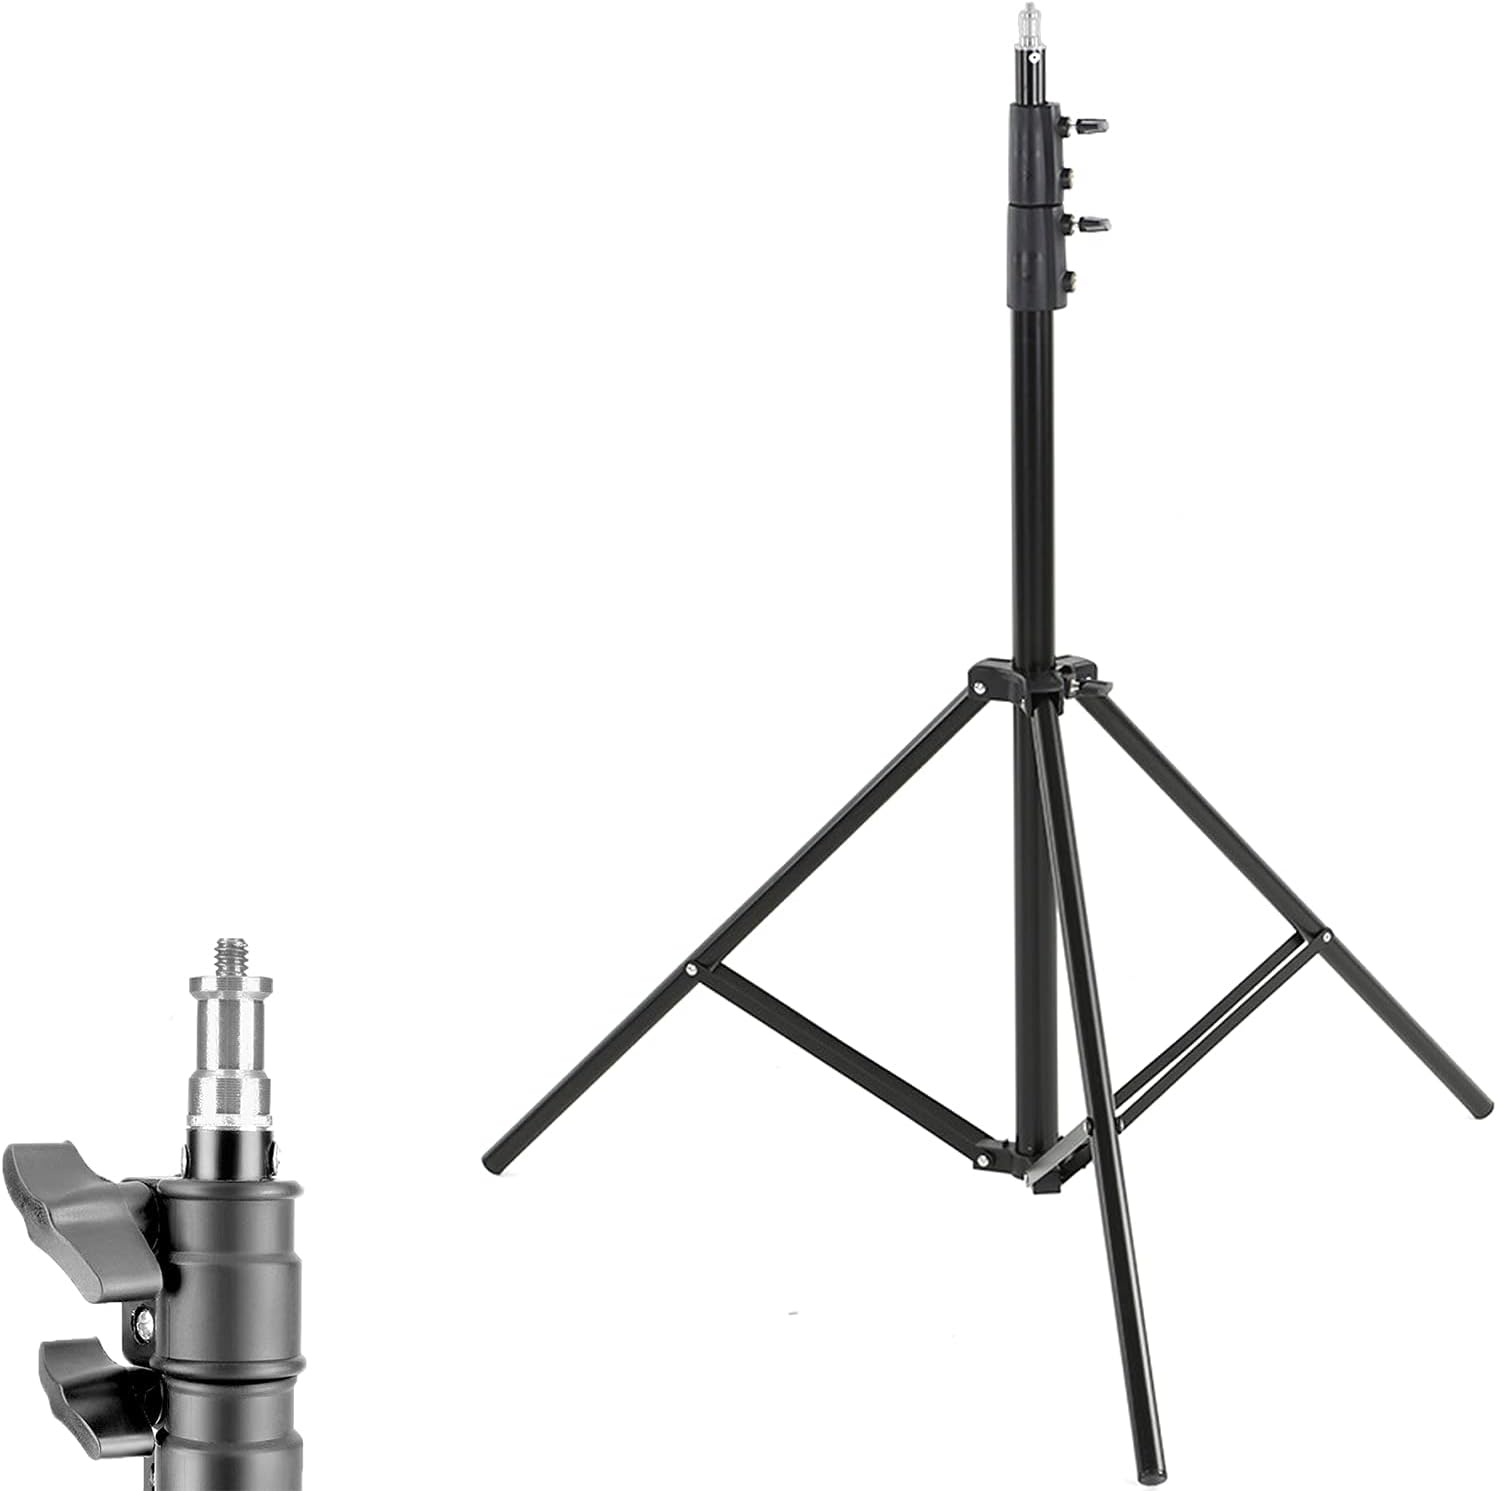 7 Foot Tripod Aluminum Compact Photography Light Stand with 1/4